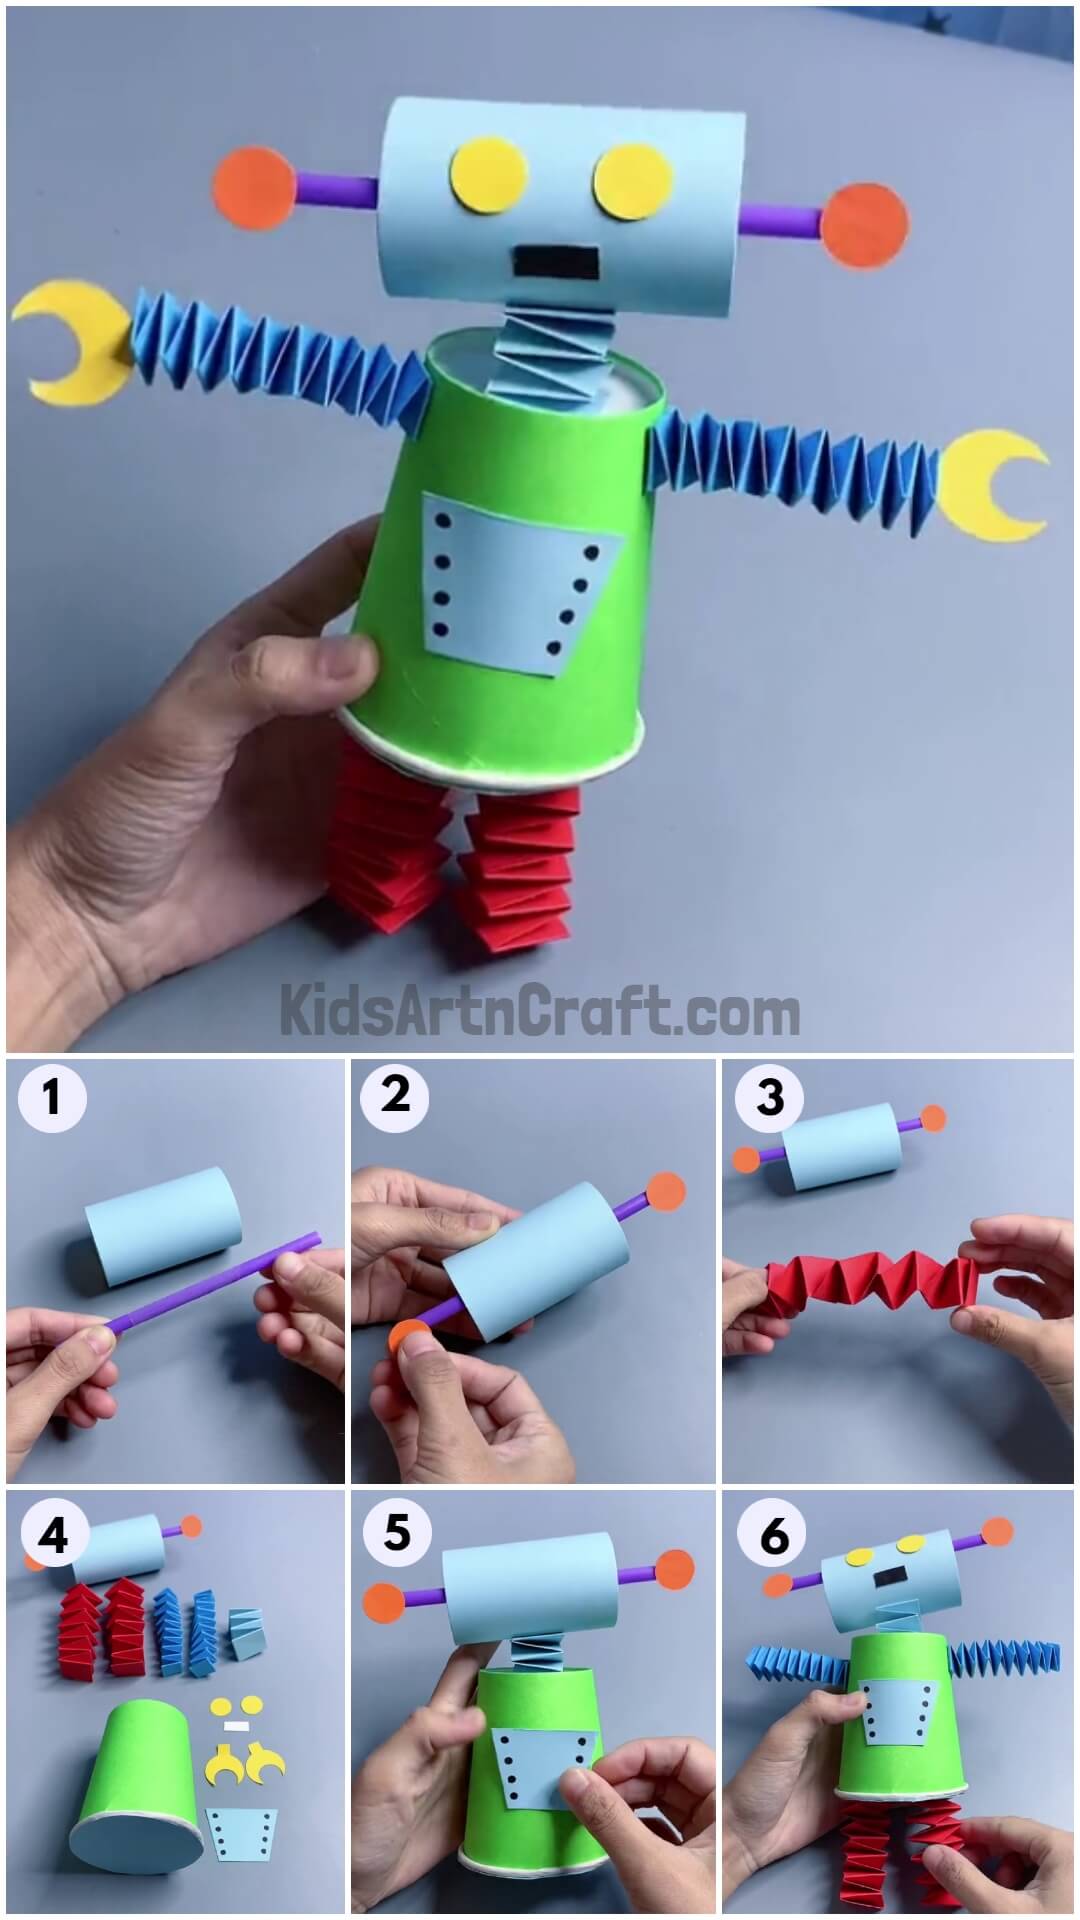 Cool Robot Craft Using Paper Cup &amp; Toilet Paper Roll Step-by-step Tutorial